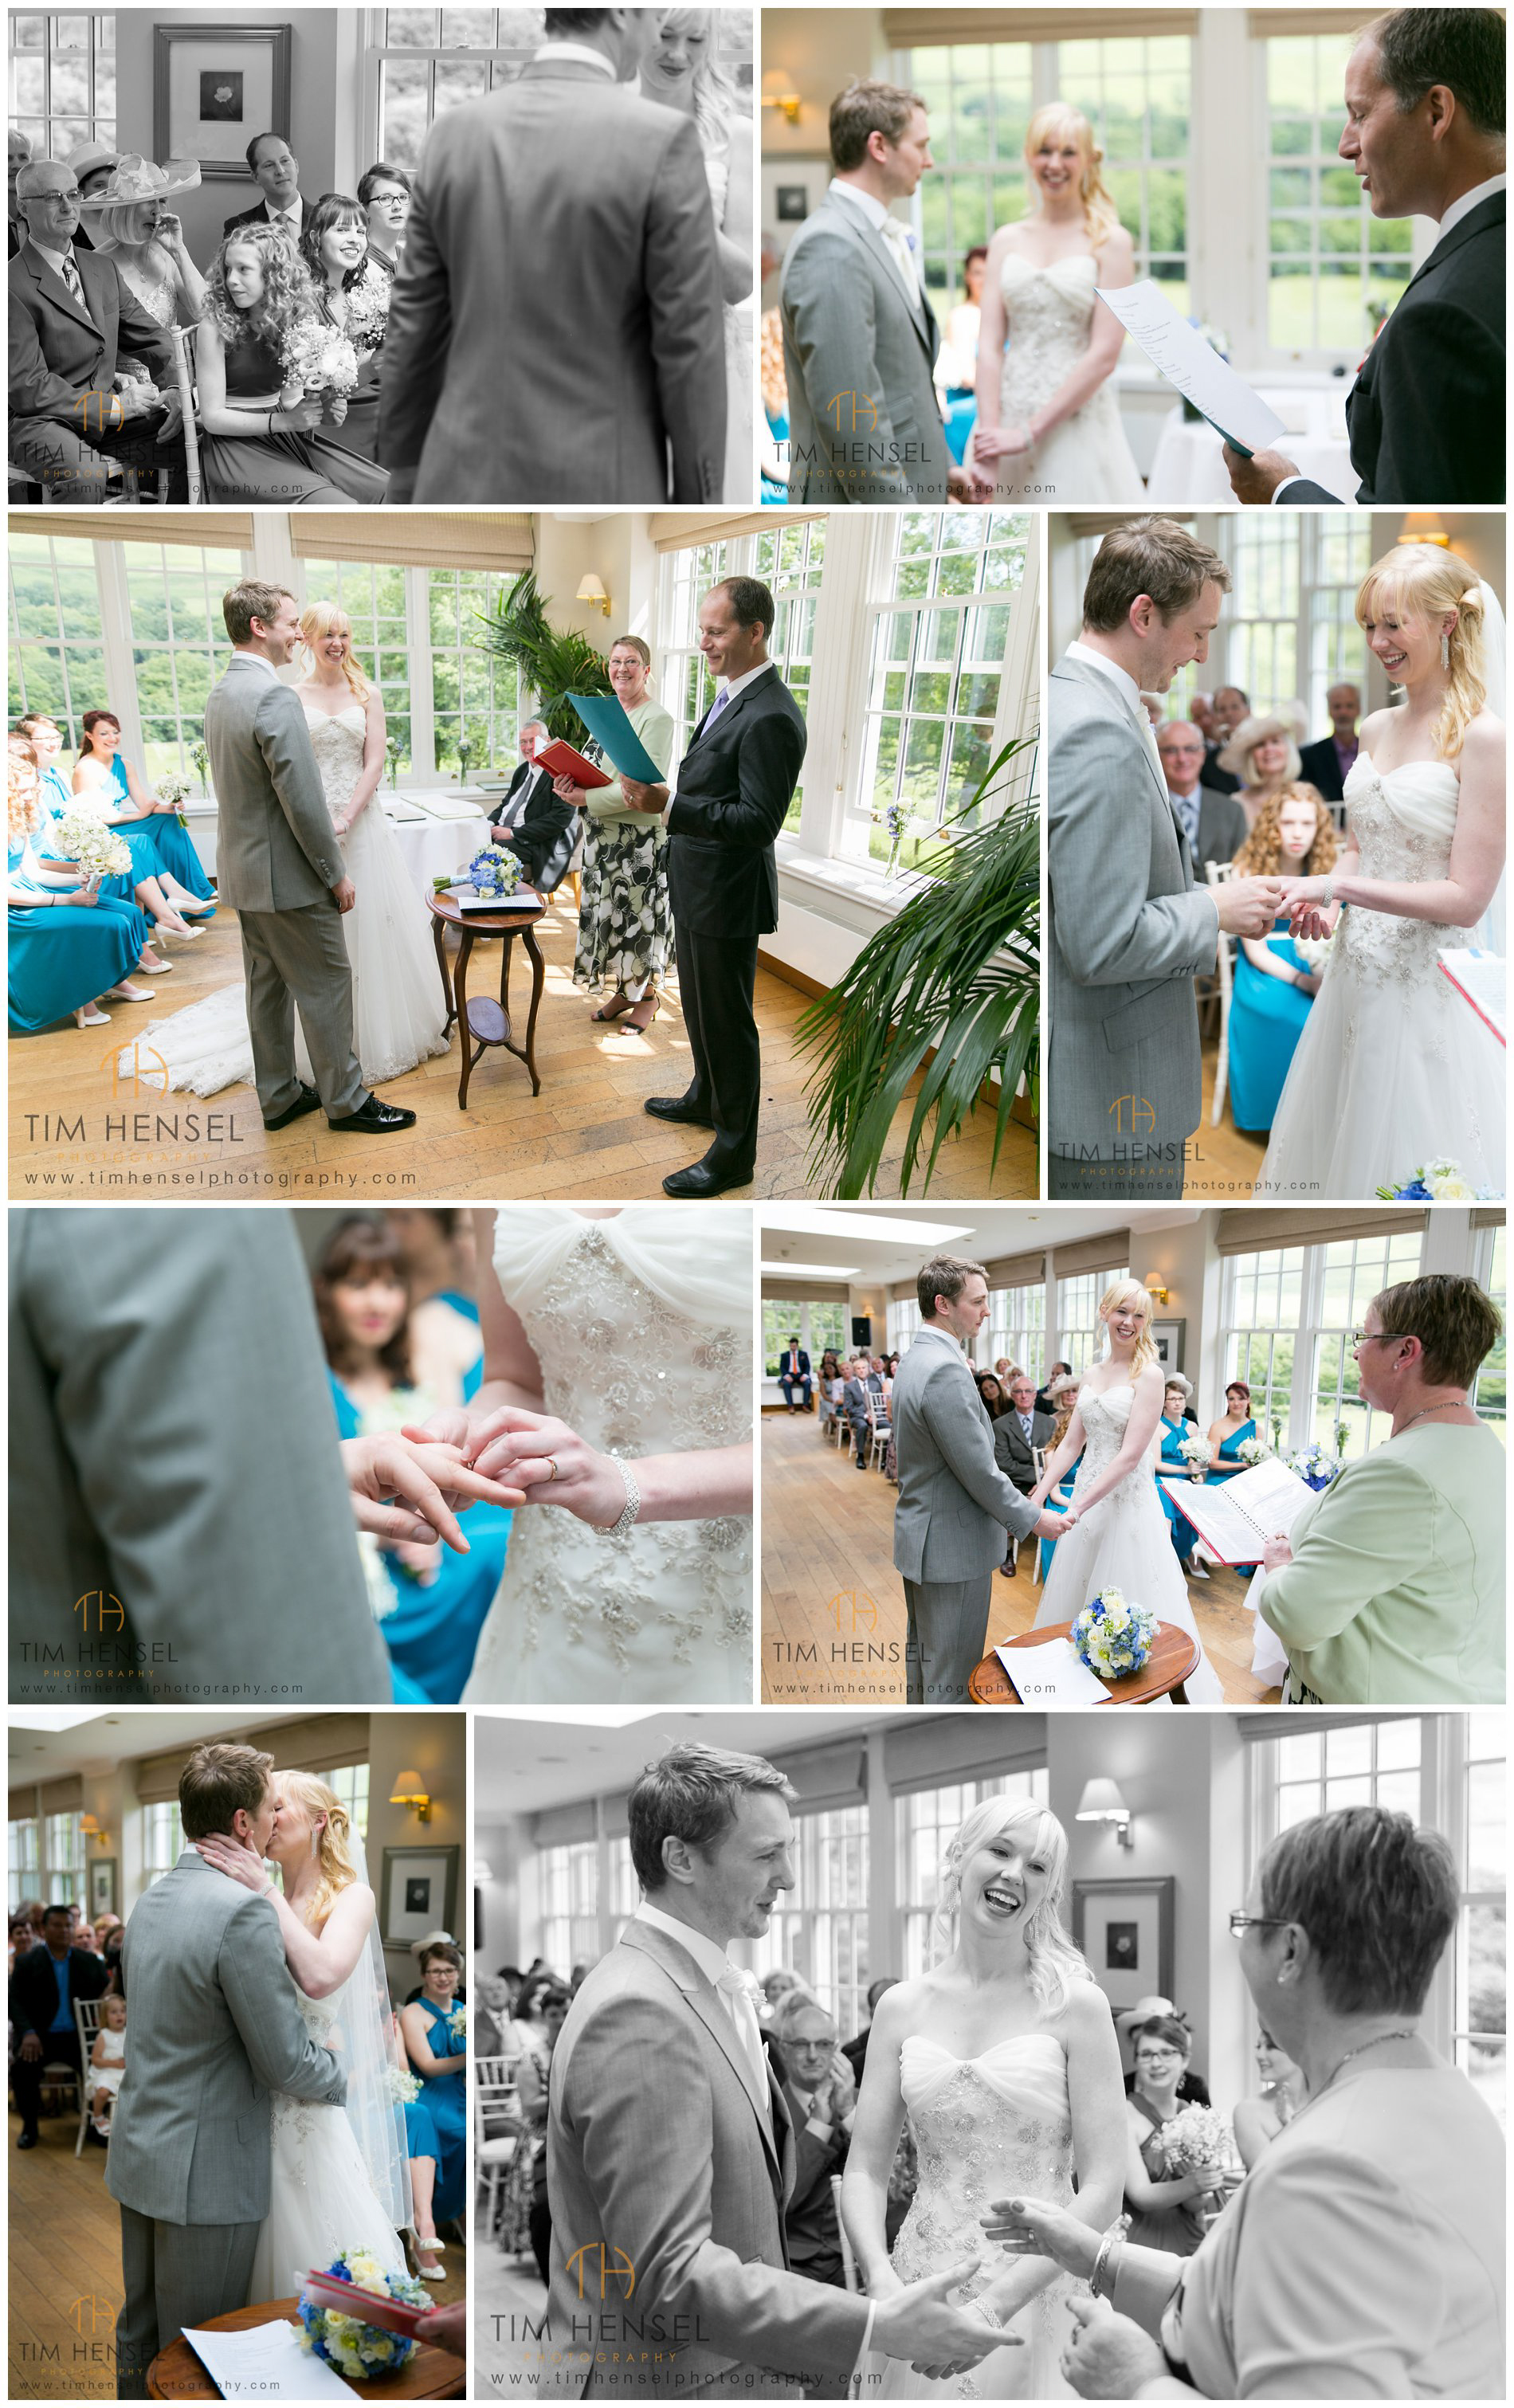 Wedding ceremony photographs at Losehill House